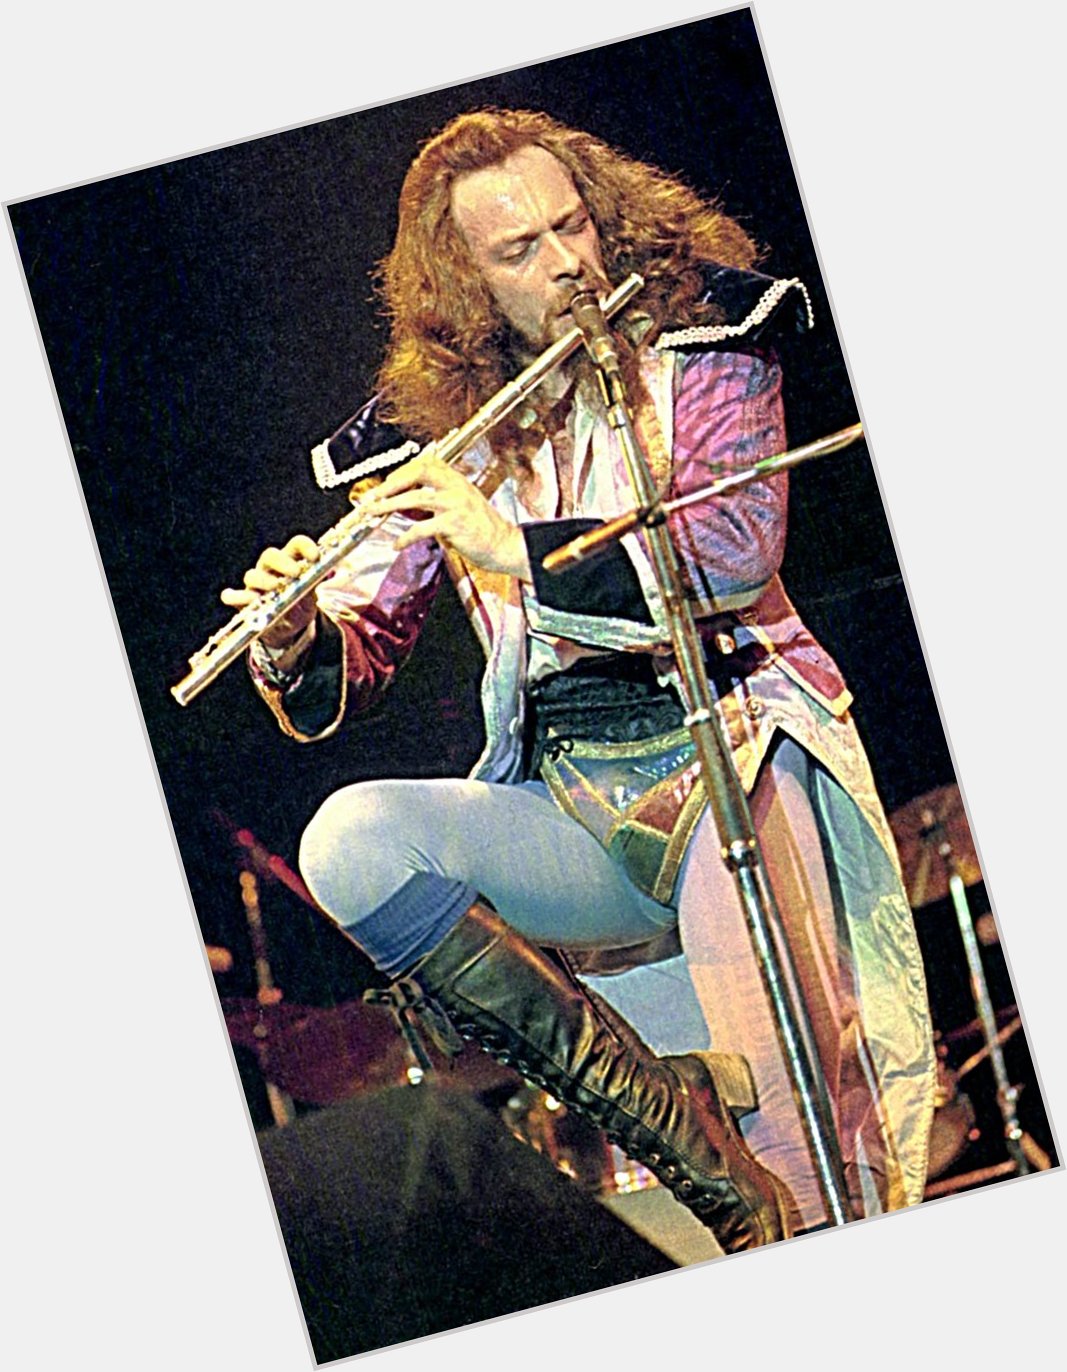 Happy birthday to multitalent Ian Anderson who turns 70 today! Time to spin some JethroTull again 